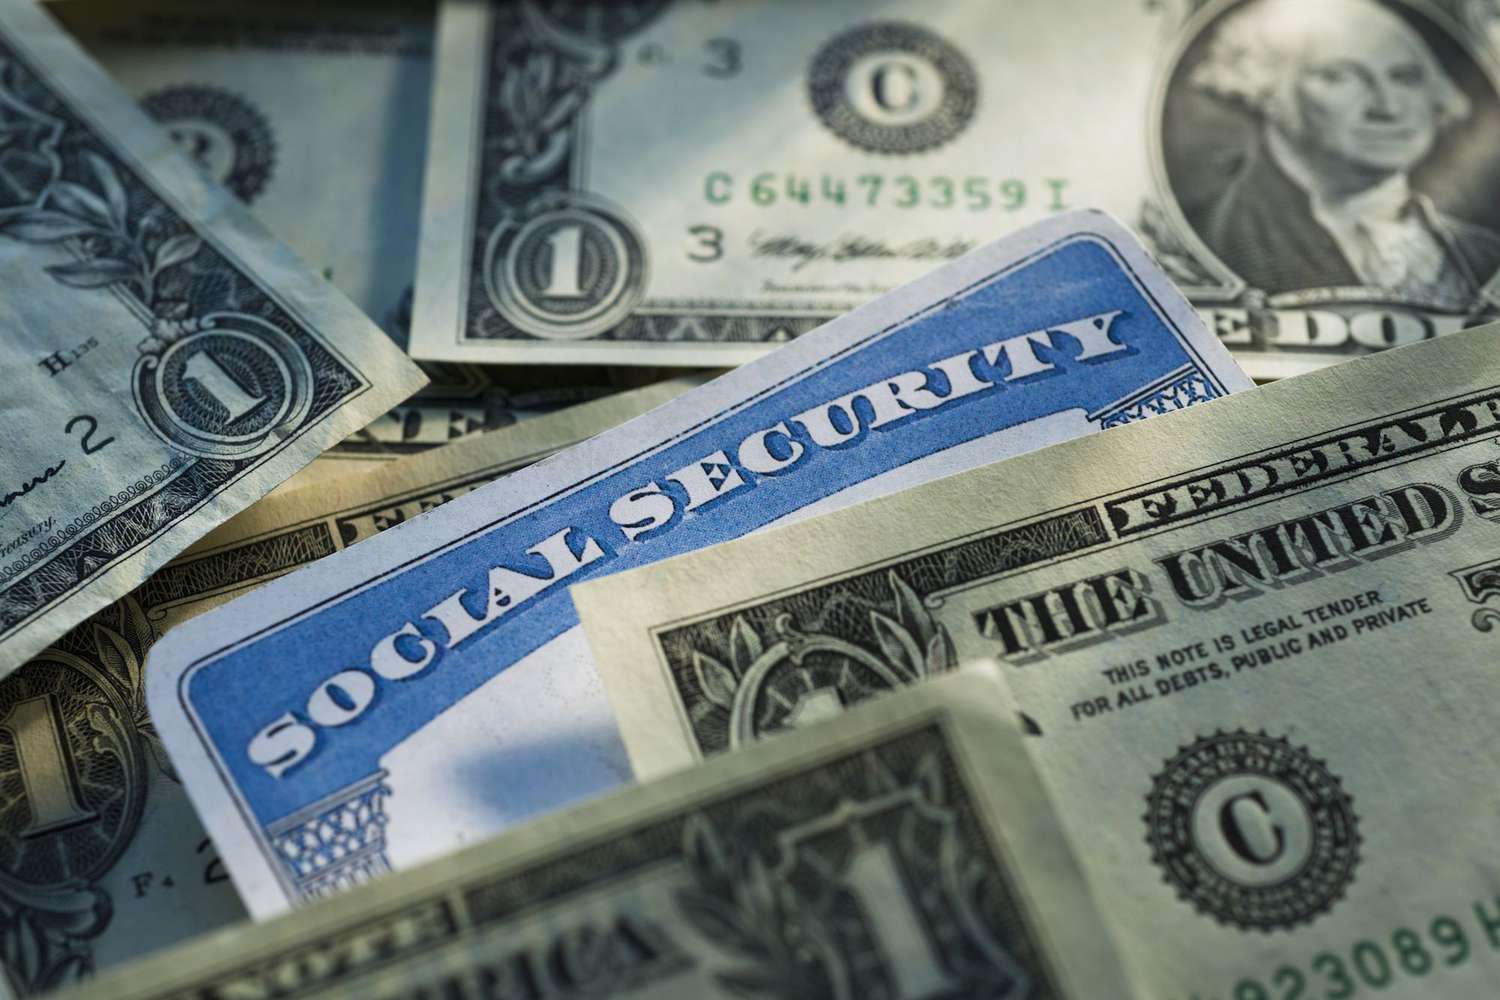 Counting Down to Cash: Your Guide to April's Social Security Check Dates Revealed